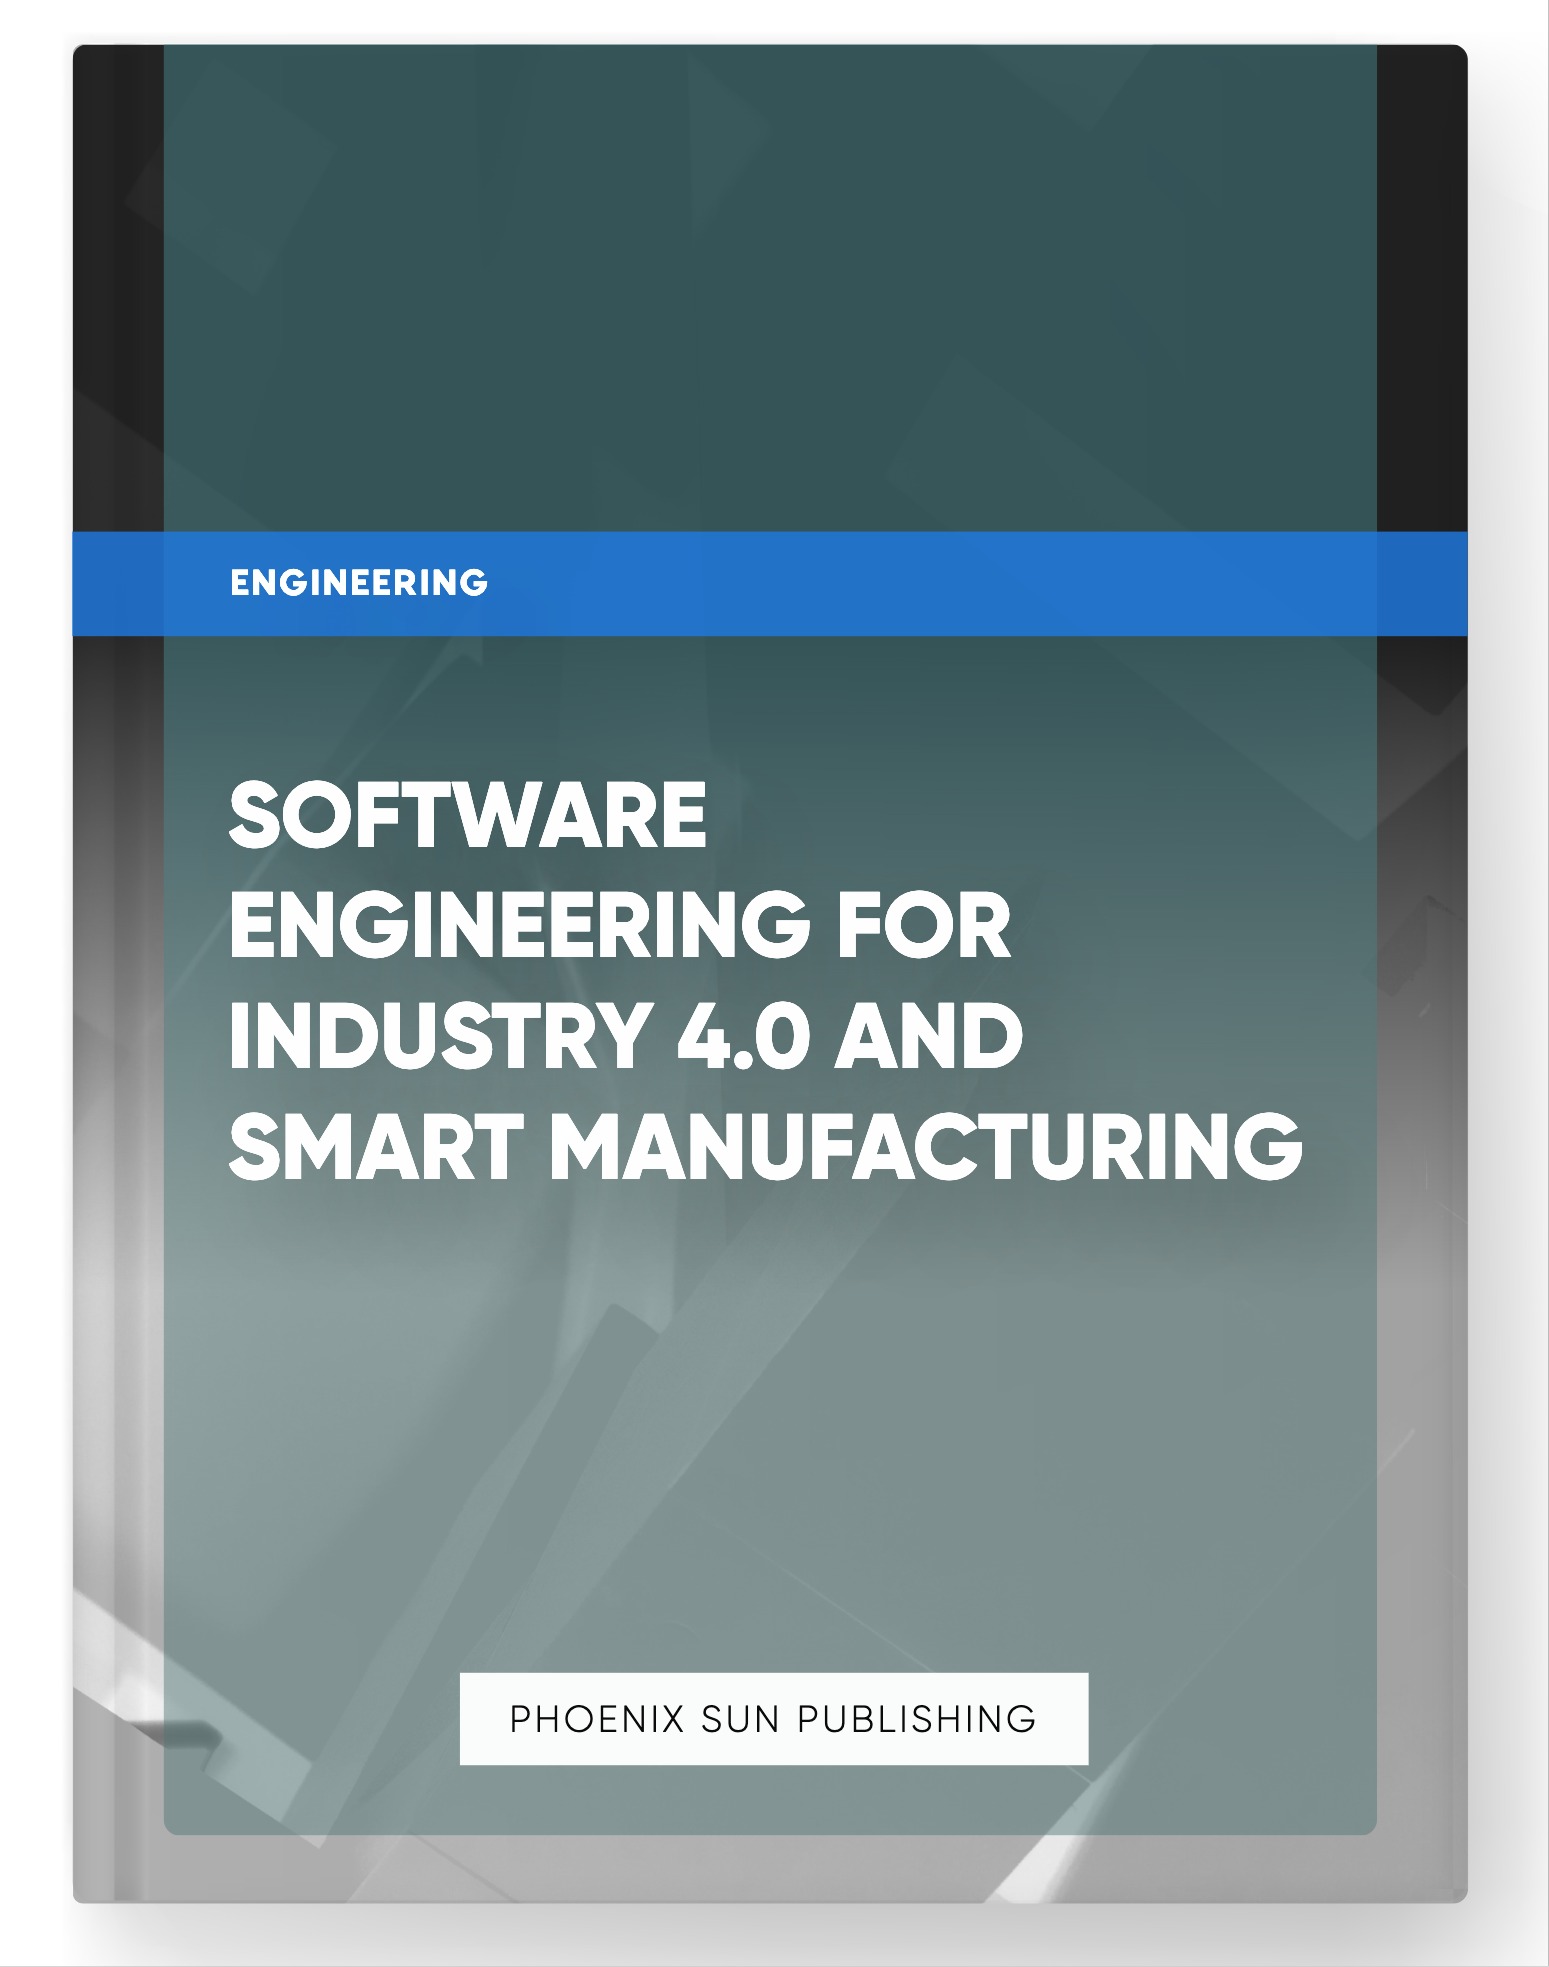 Software Engineering for Industry 4.0 and Smart Manufacturing